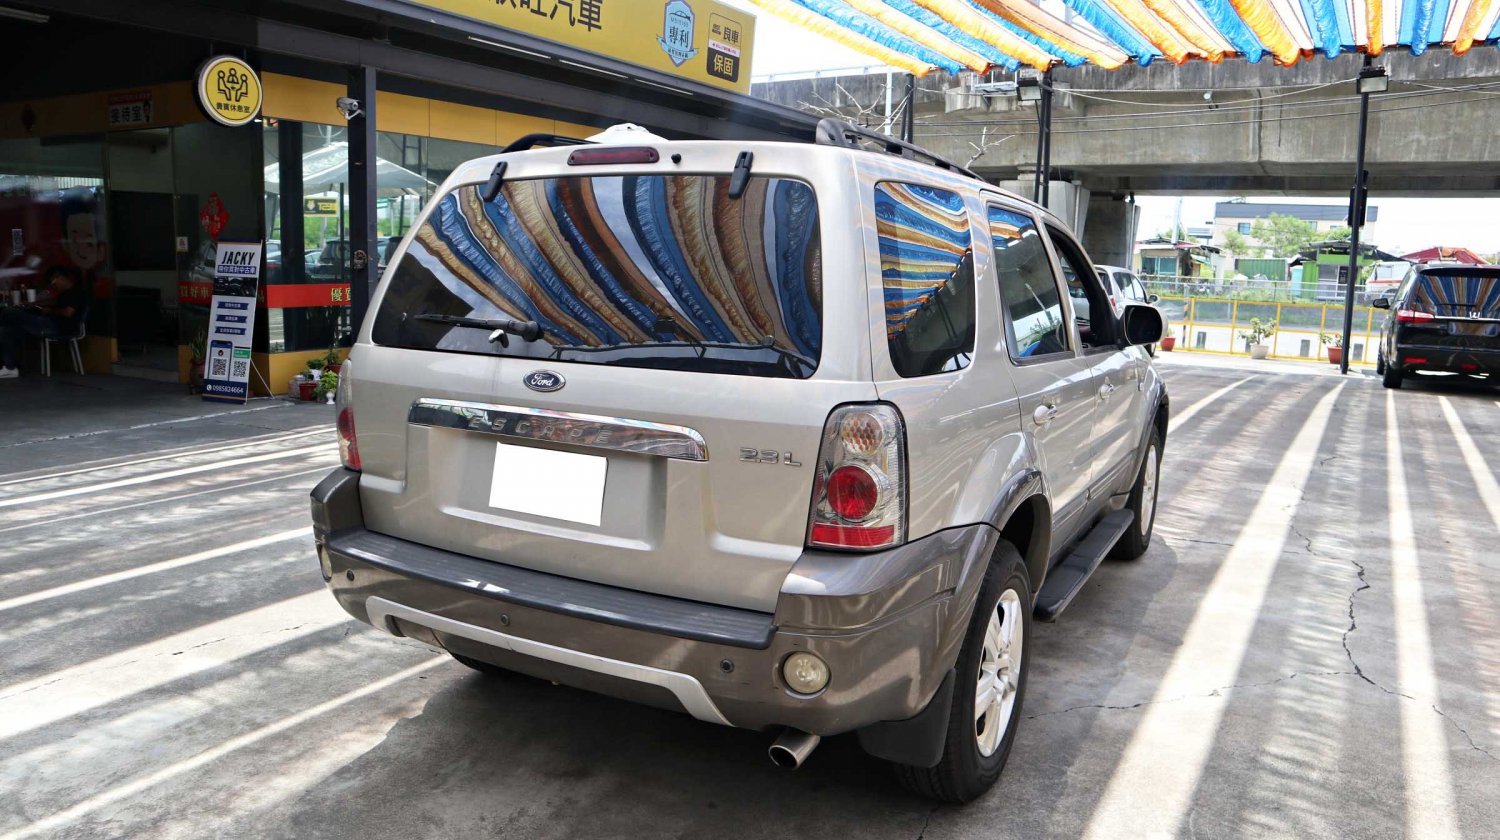 Ford 福特 ／ Escape ／ 2006年 ／ 2006年 Ford Escape 淺棕灰色 福特中古休旅車 ／ 成交區